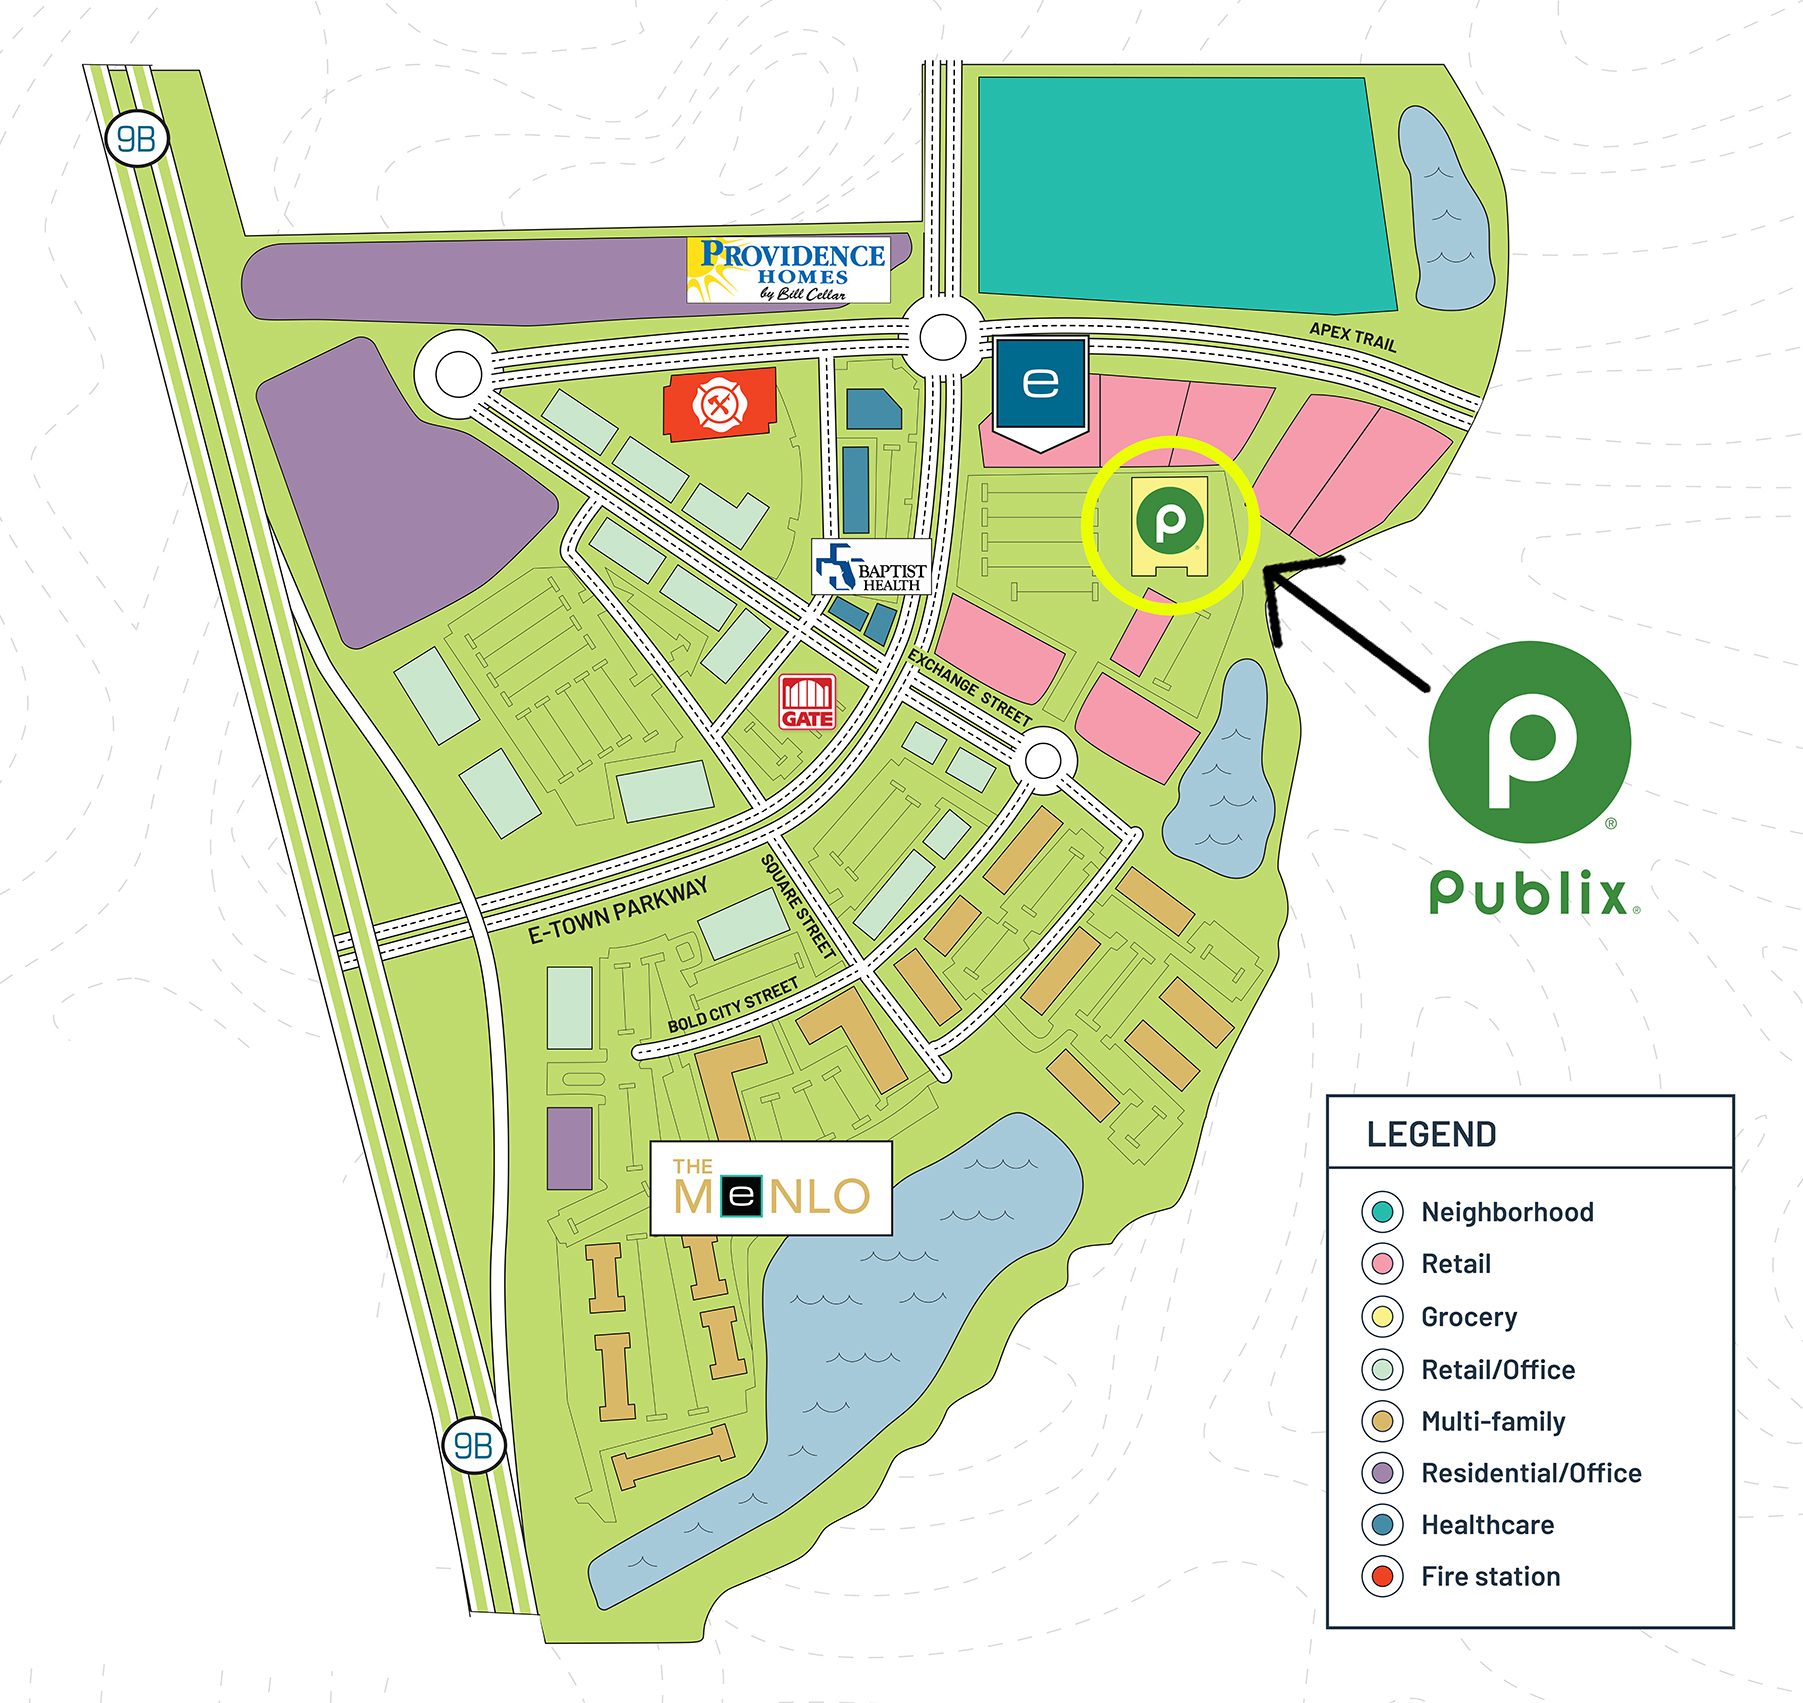 A map of the Publix at eTown.